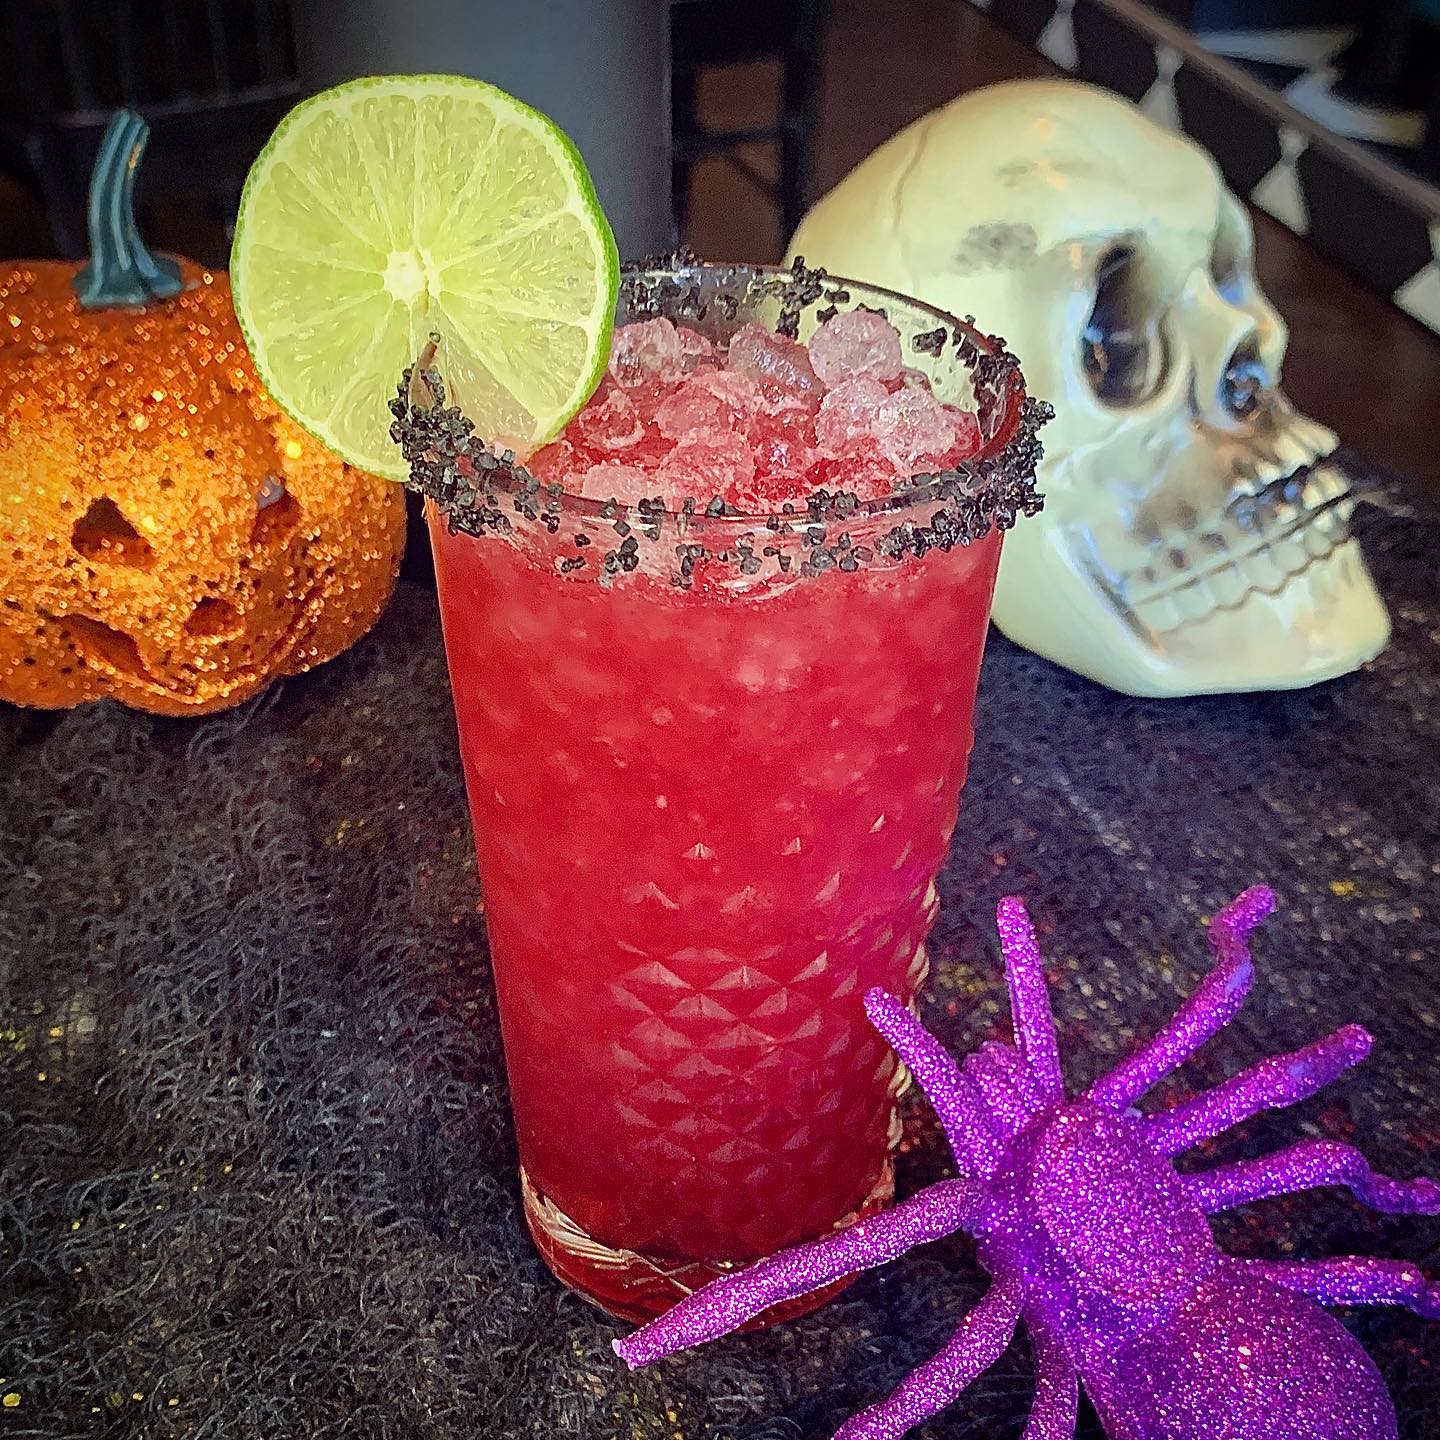 It’s almost Halloween, so I wanted to share one of my favorite seasonal recipes, the Pomegranate Elderflower Margarita! If you live in the Denver area, you can try this cocktail at @soradisharvada through 10/31, or just checkout this easy recipe on my blog (link in bio).
.
.
.
.
.
.
.
#cocktails #cocktailrecipes #tequilacocktails #halloween2021 #halloweencocktails #halloweencocktail #spookydrinks #pomegranatejuice #margaritarecipe #veganblog #denverblogger #denverbloggers #coloradoblogger #vegetarian #plantbased #plantbasedrecipes #veganrecipeshare #cocktails #craftcocktails #craftcocktailsathome #booze #feedfeed #coloradolife #imbibe #drinkstagram #mixology #craftcocktail #cocktailhour #imbibegram #bartending